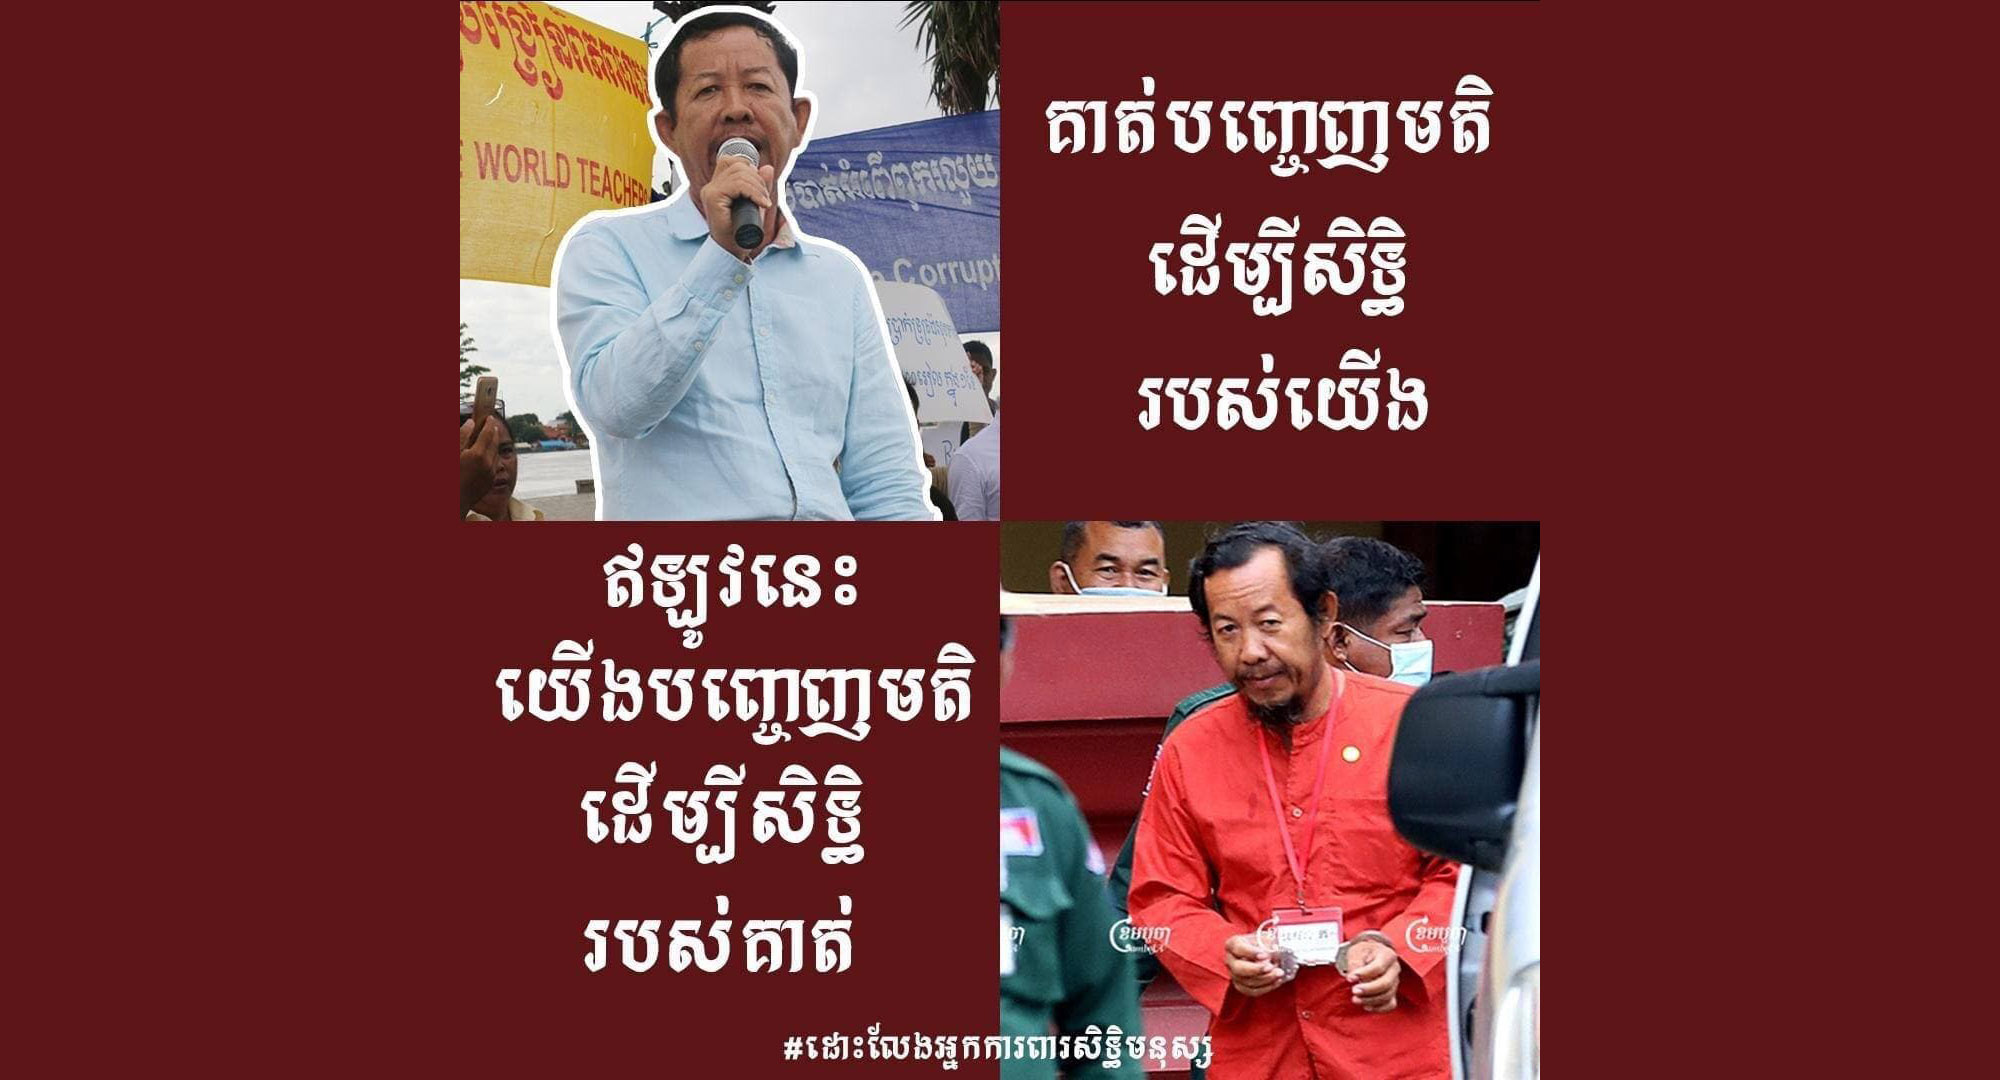 CSOs posted images of unionist Rong Chhun image on social media during the sixth week of a campaign calling for the release of imprisoned human right defenders.